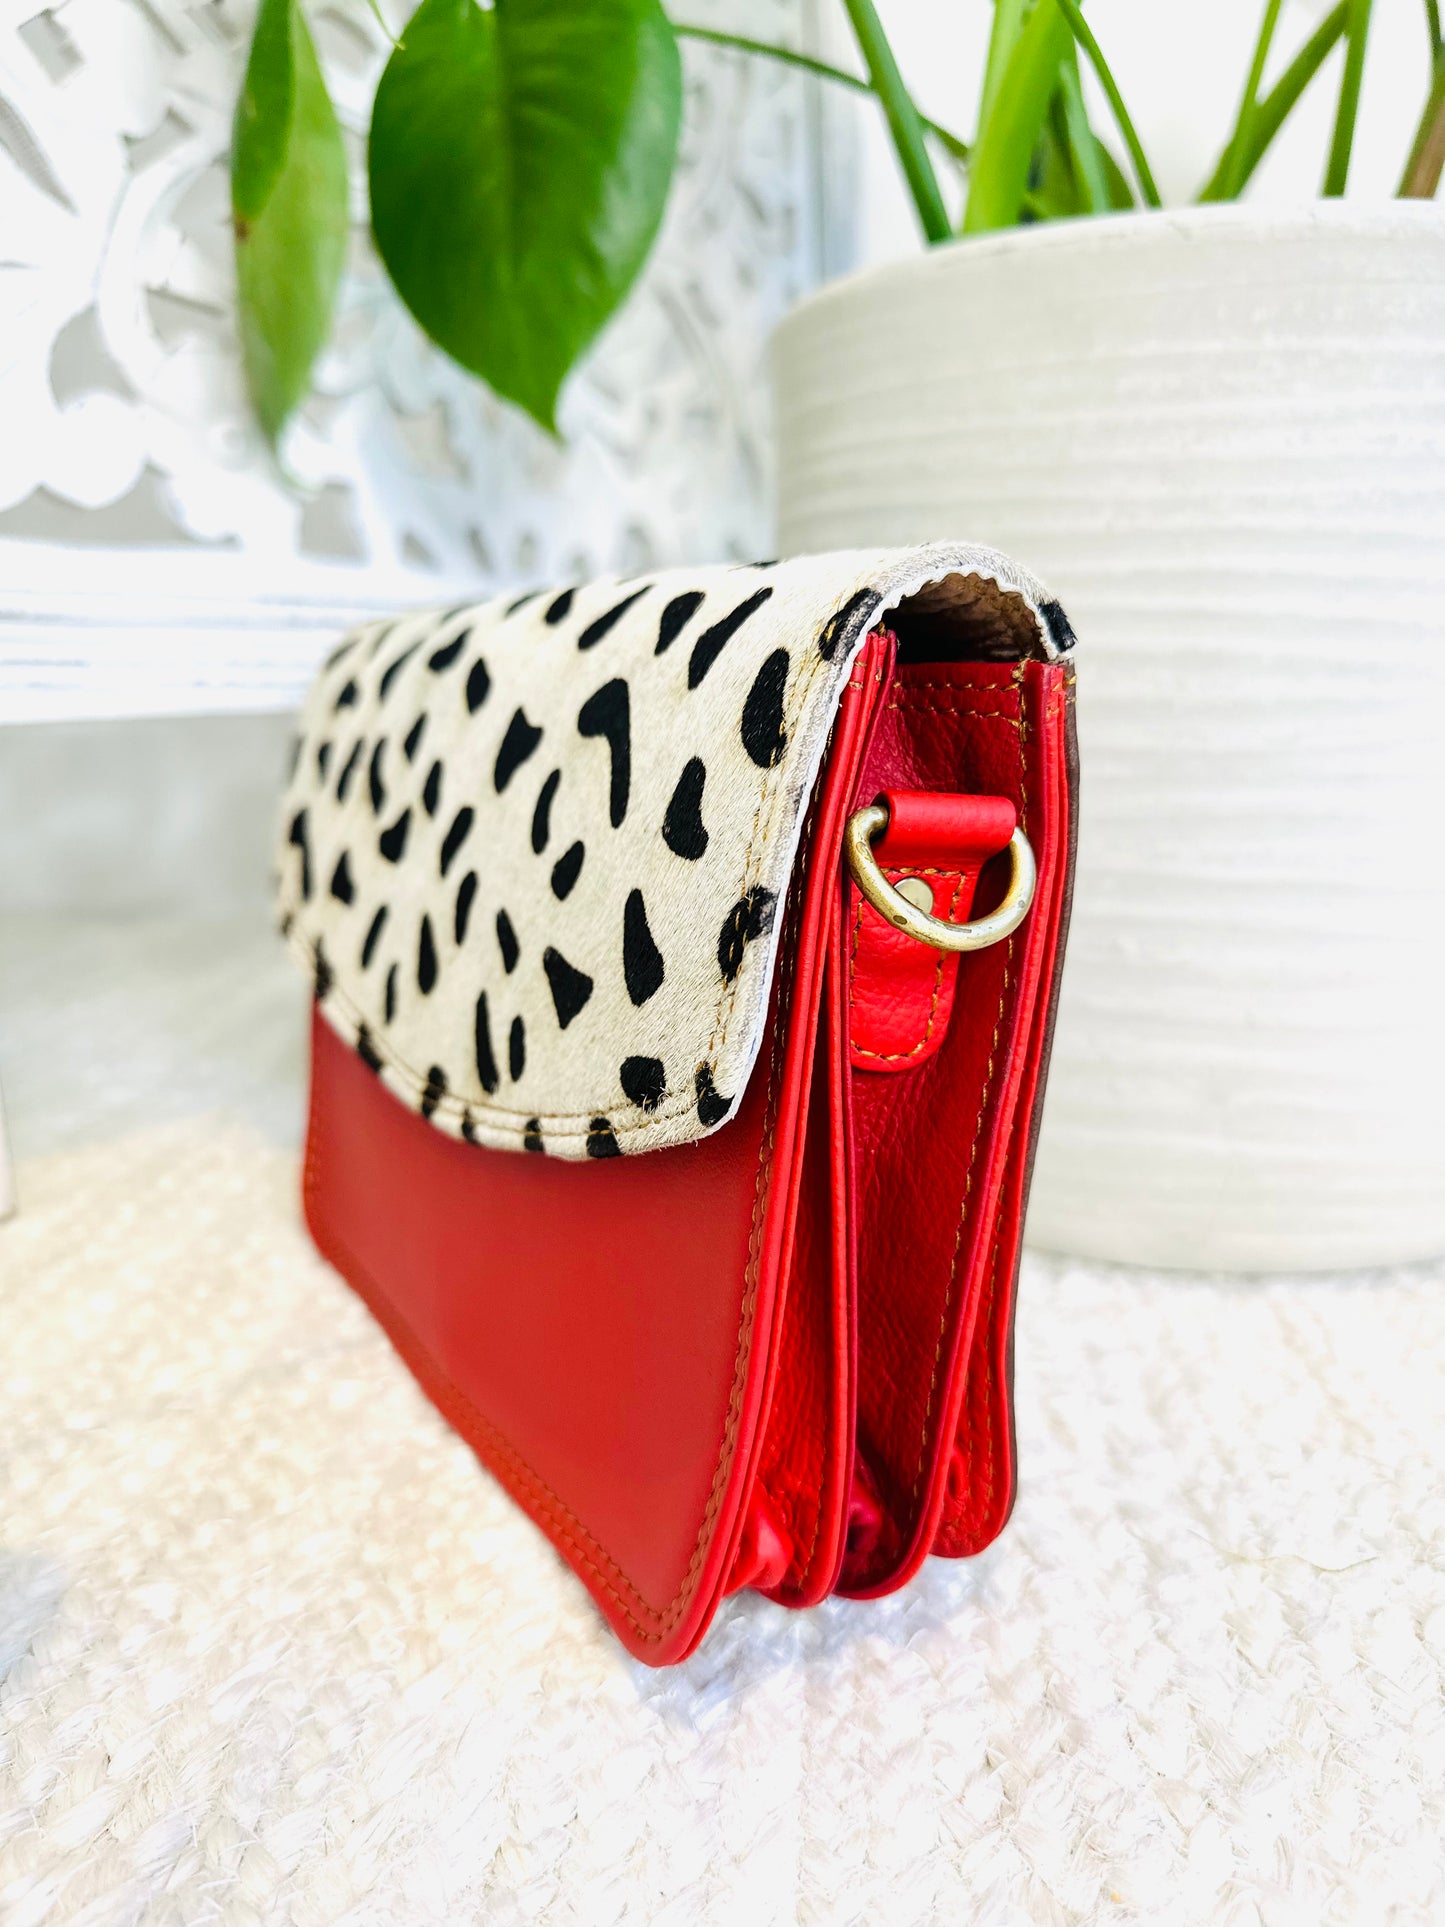 Animal Print / Red Small Clutch